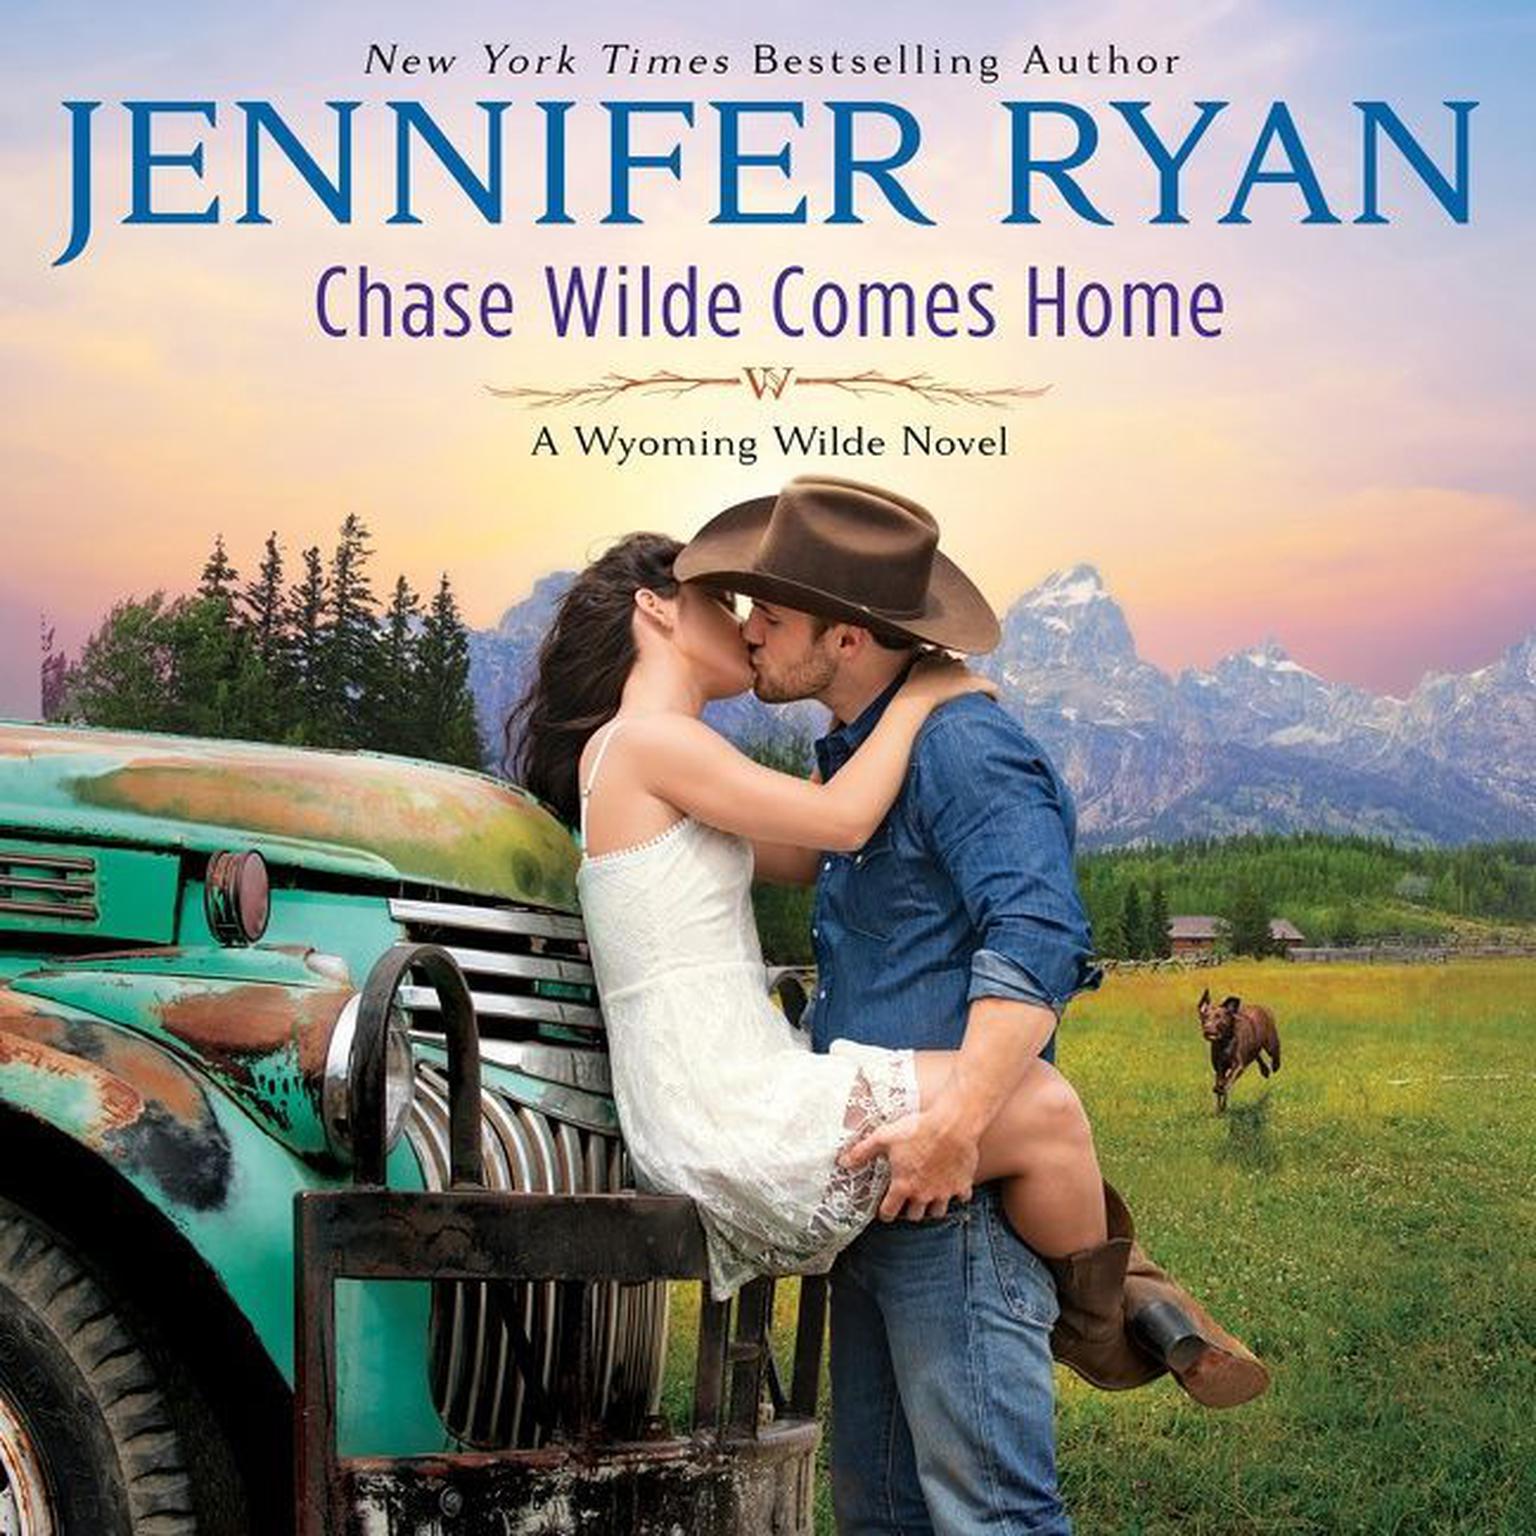 Chase Wilde Comes Home: A Wyoming Wilde Novel Audiobook, by Jennifer Ryan